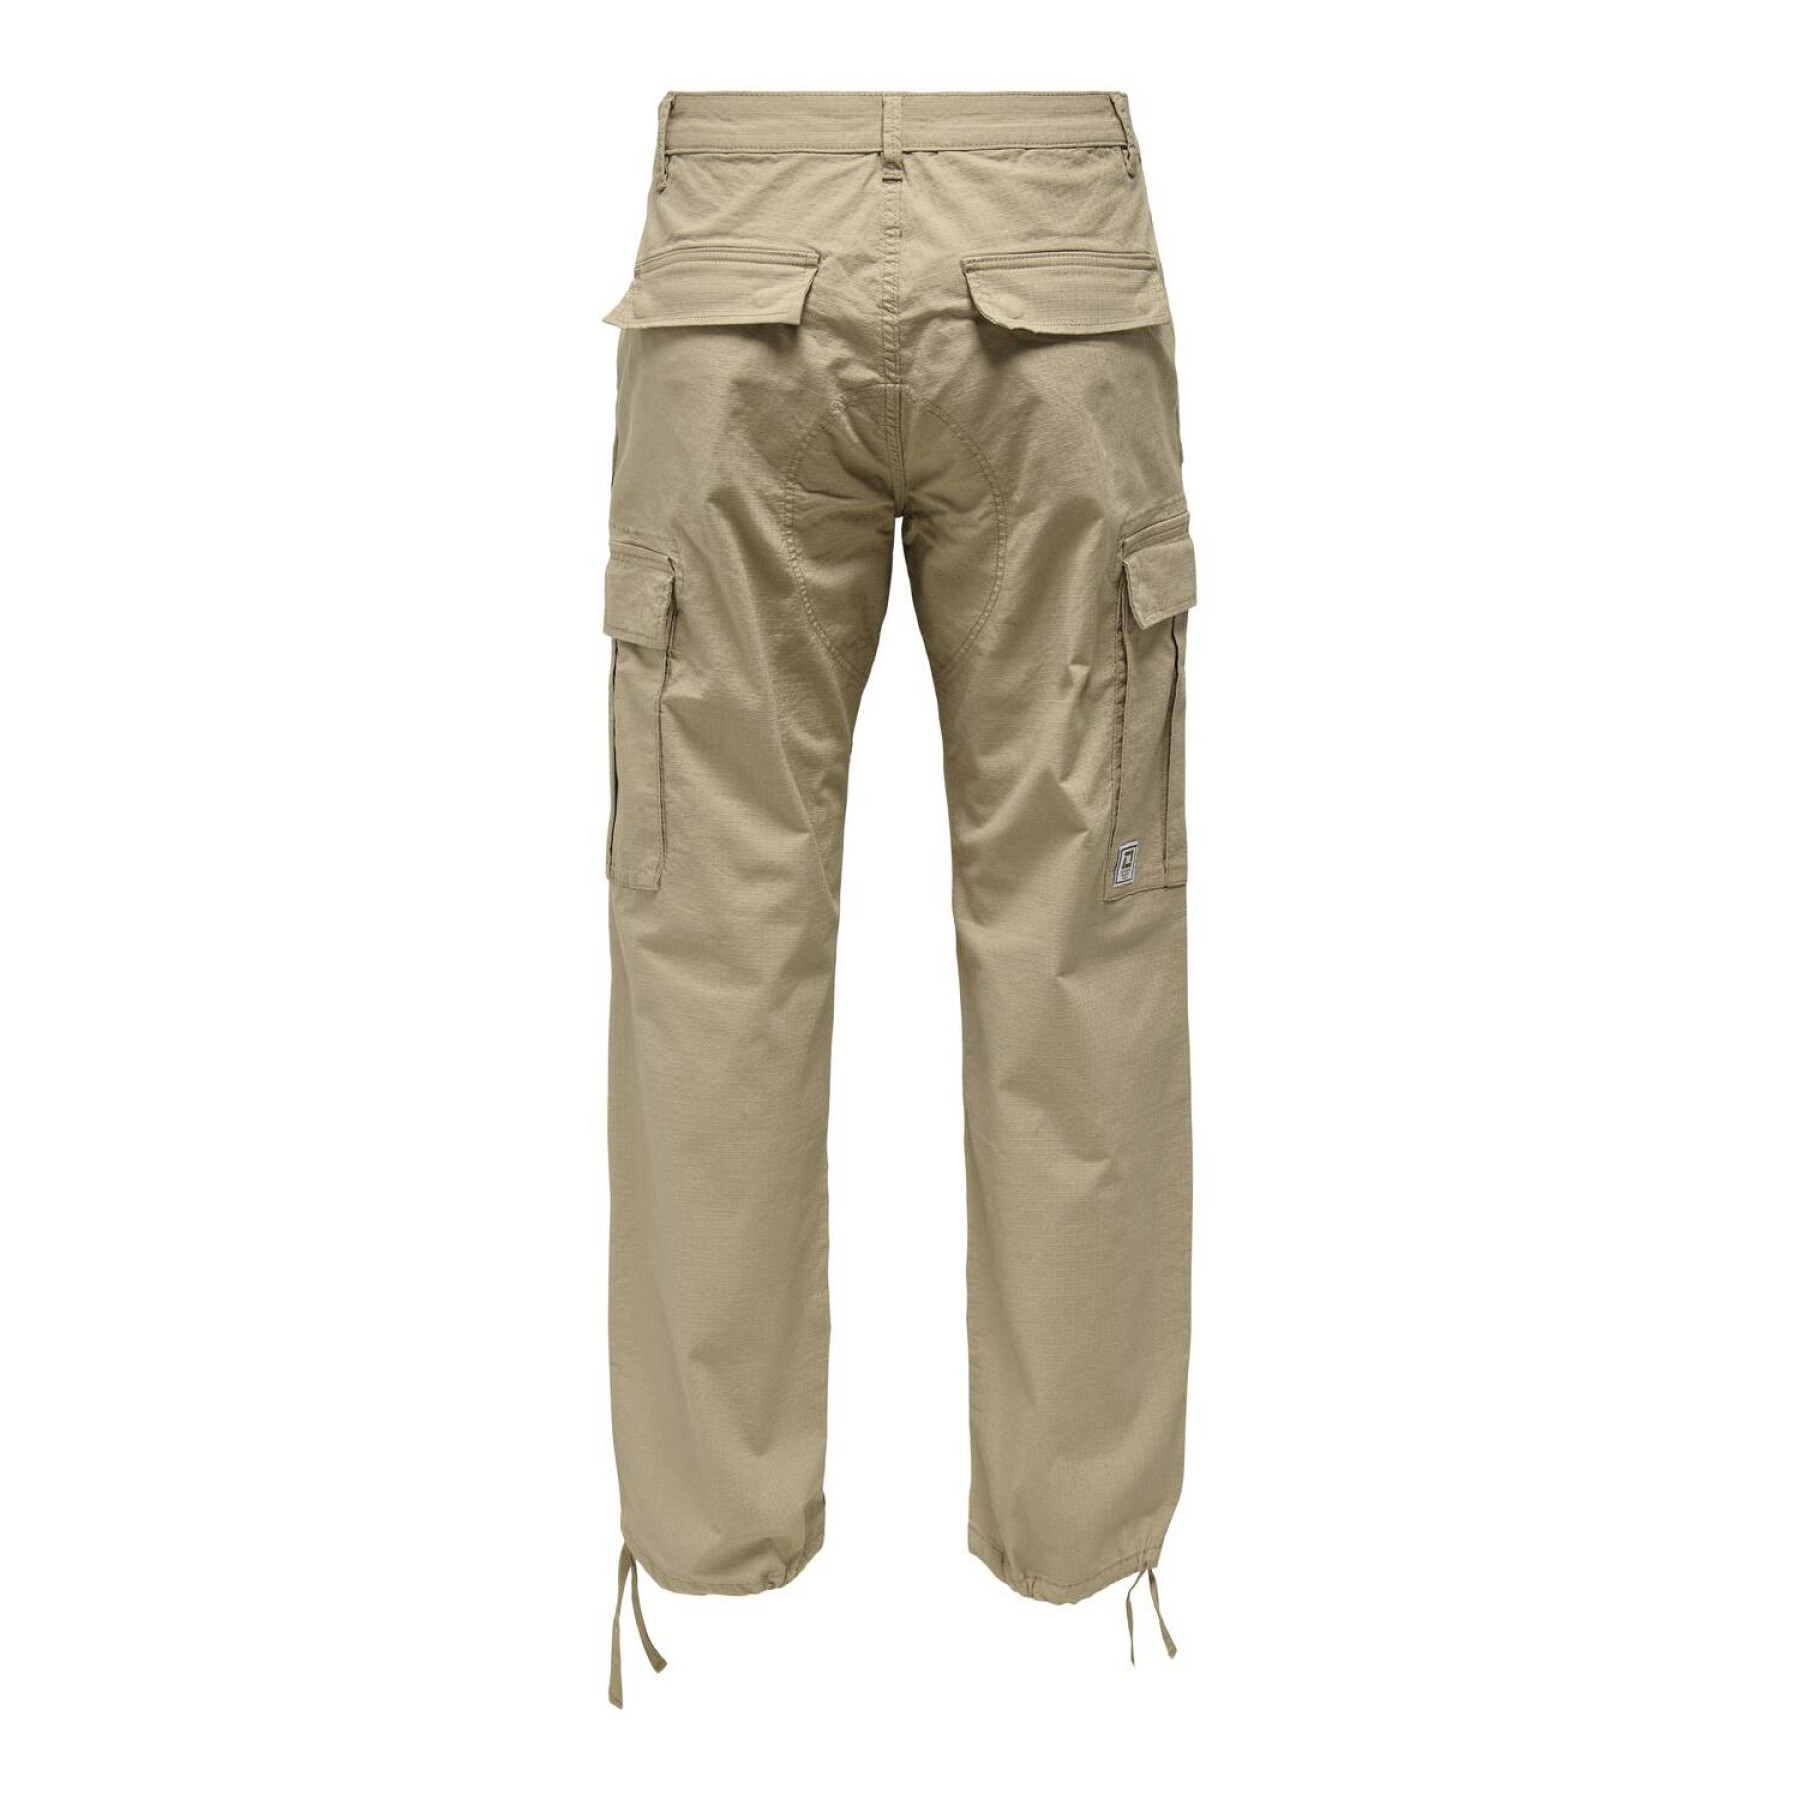 Cargo pants Only & Sons Ray Life 0020 Ribstop